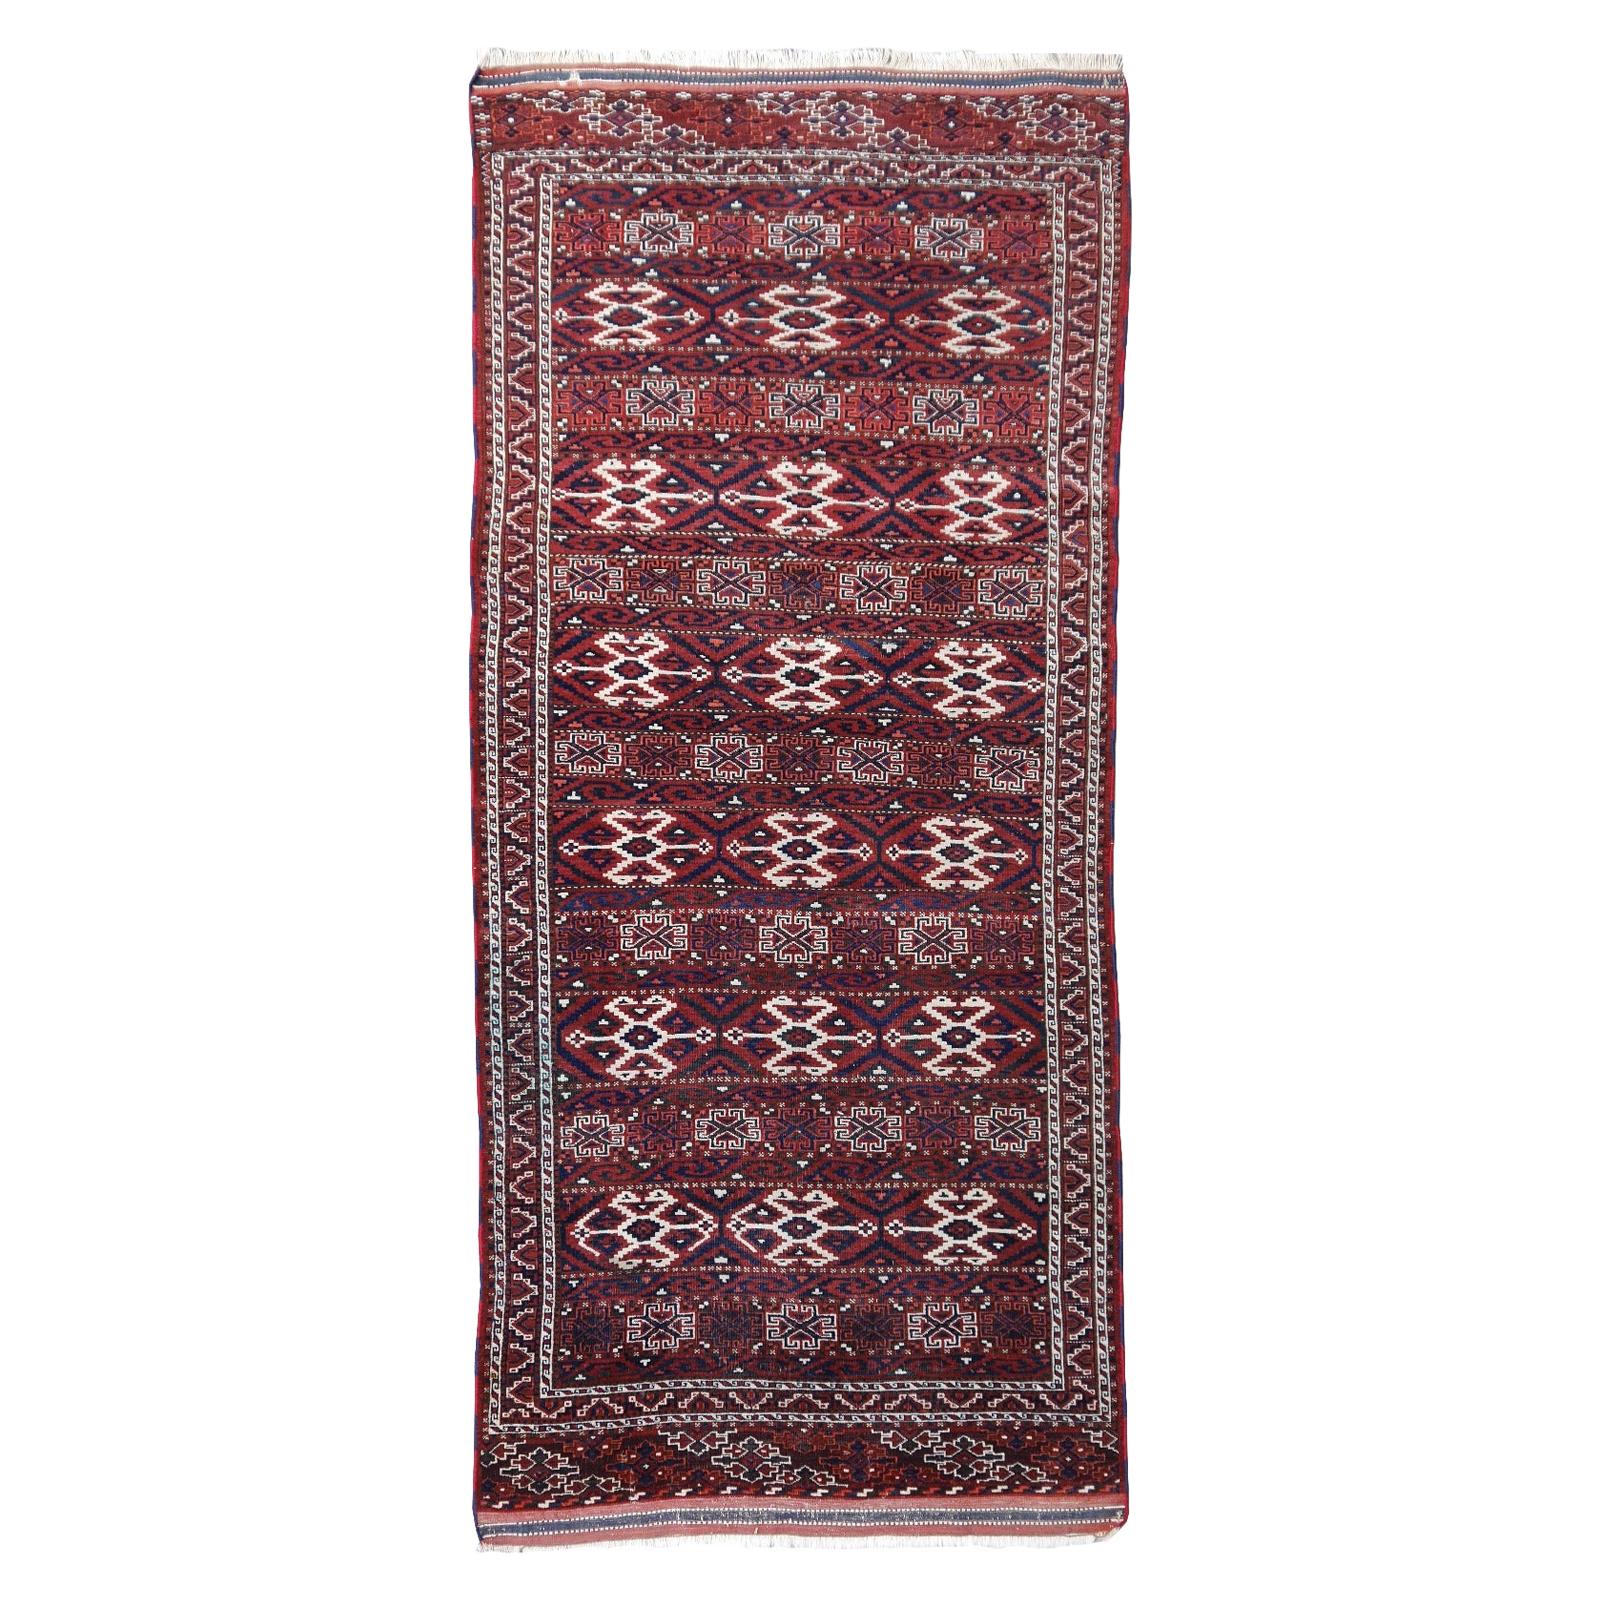 Yomud Tribeal Turkmen Turkoman Antique Rug with Ram Motive Hand Knotted Carpet For Sale